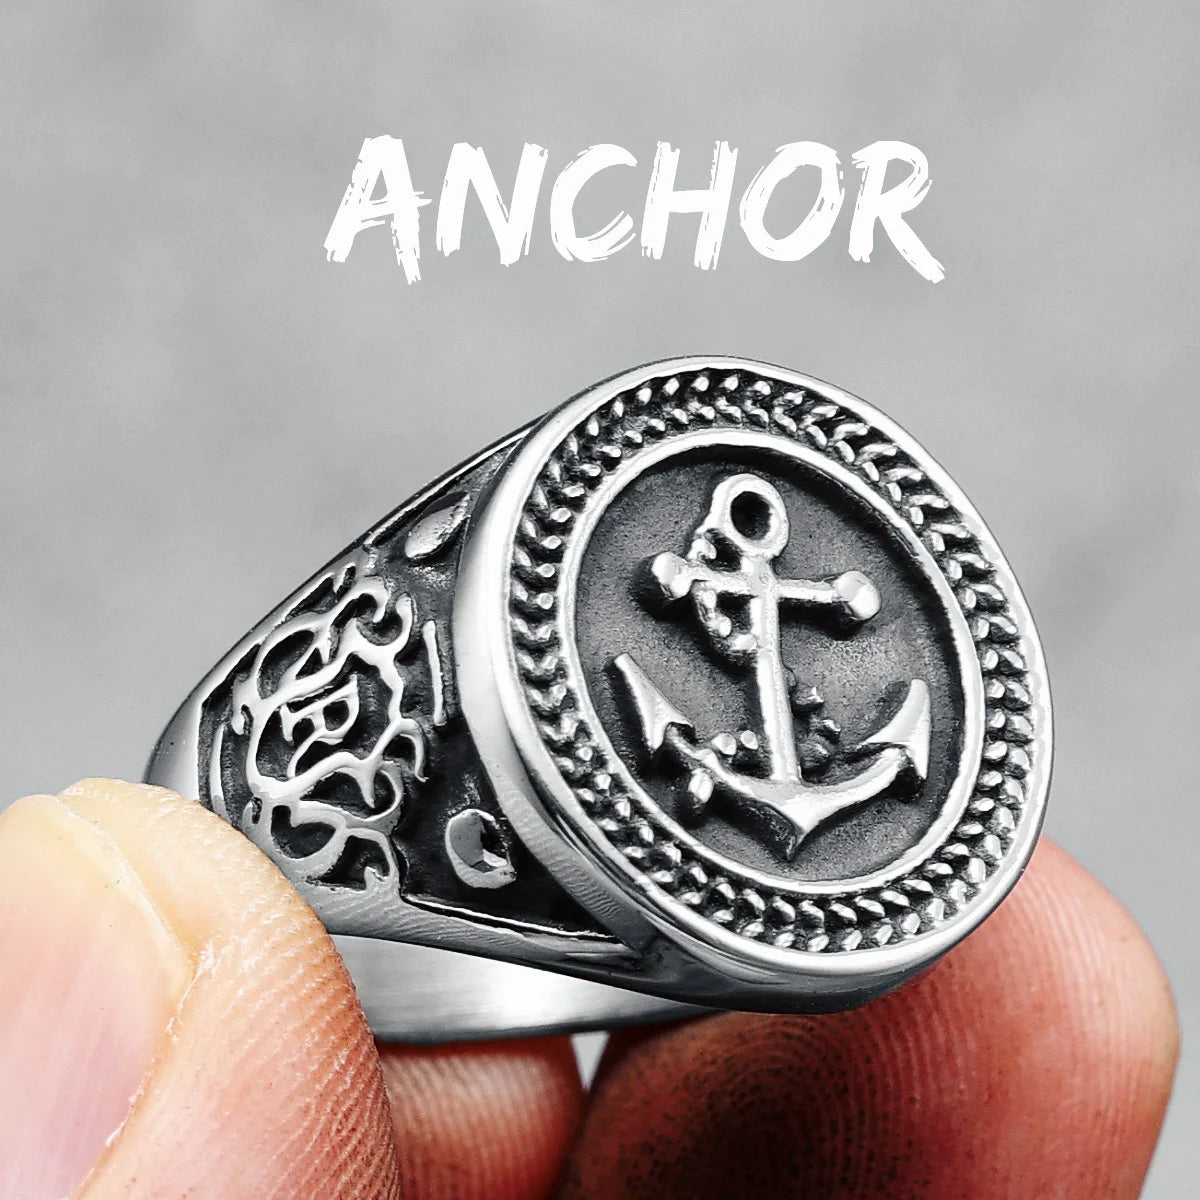 Sailboat Ring 316L Stainless Steel Men Rings Ocean Sailor Smooth Sailing Rock Rap for Biker Male Boyfriend Jewelry Best Gift R867-Anchor